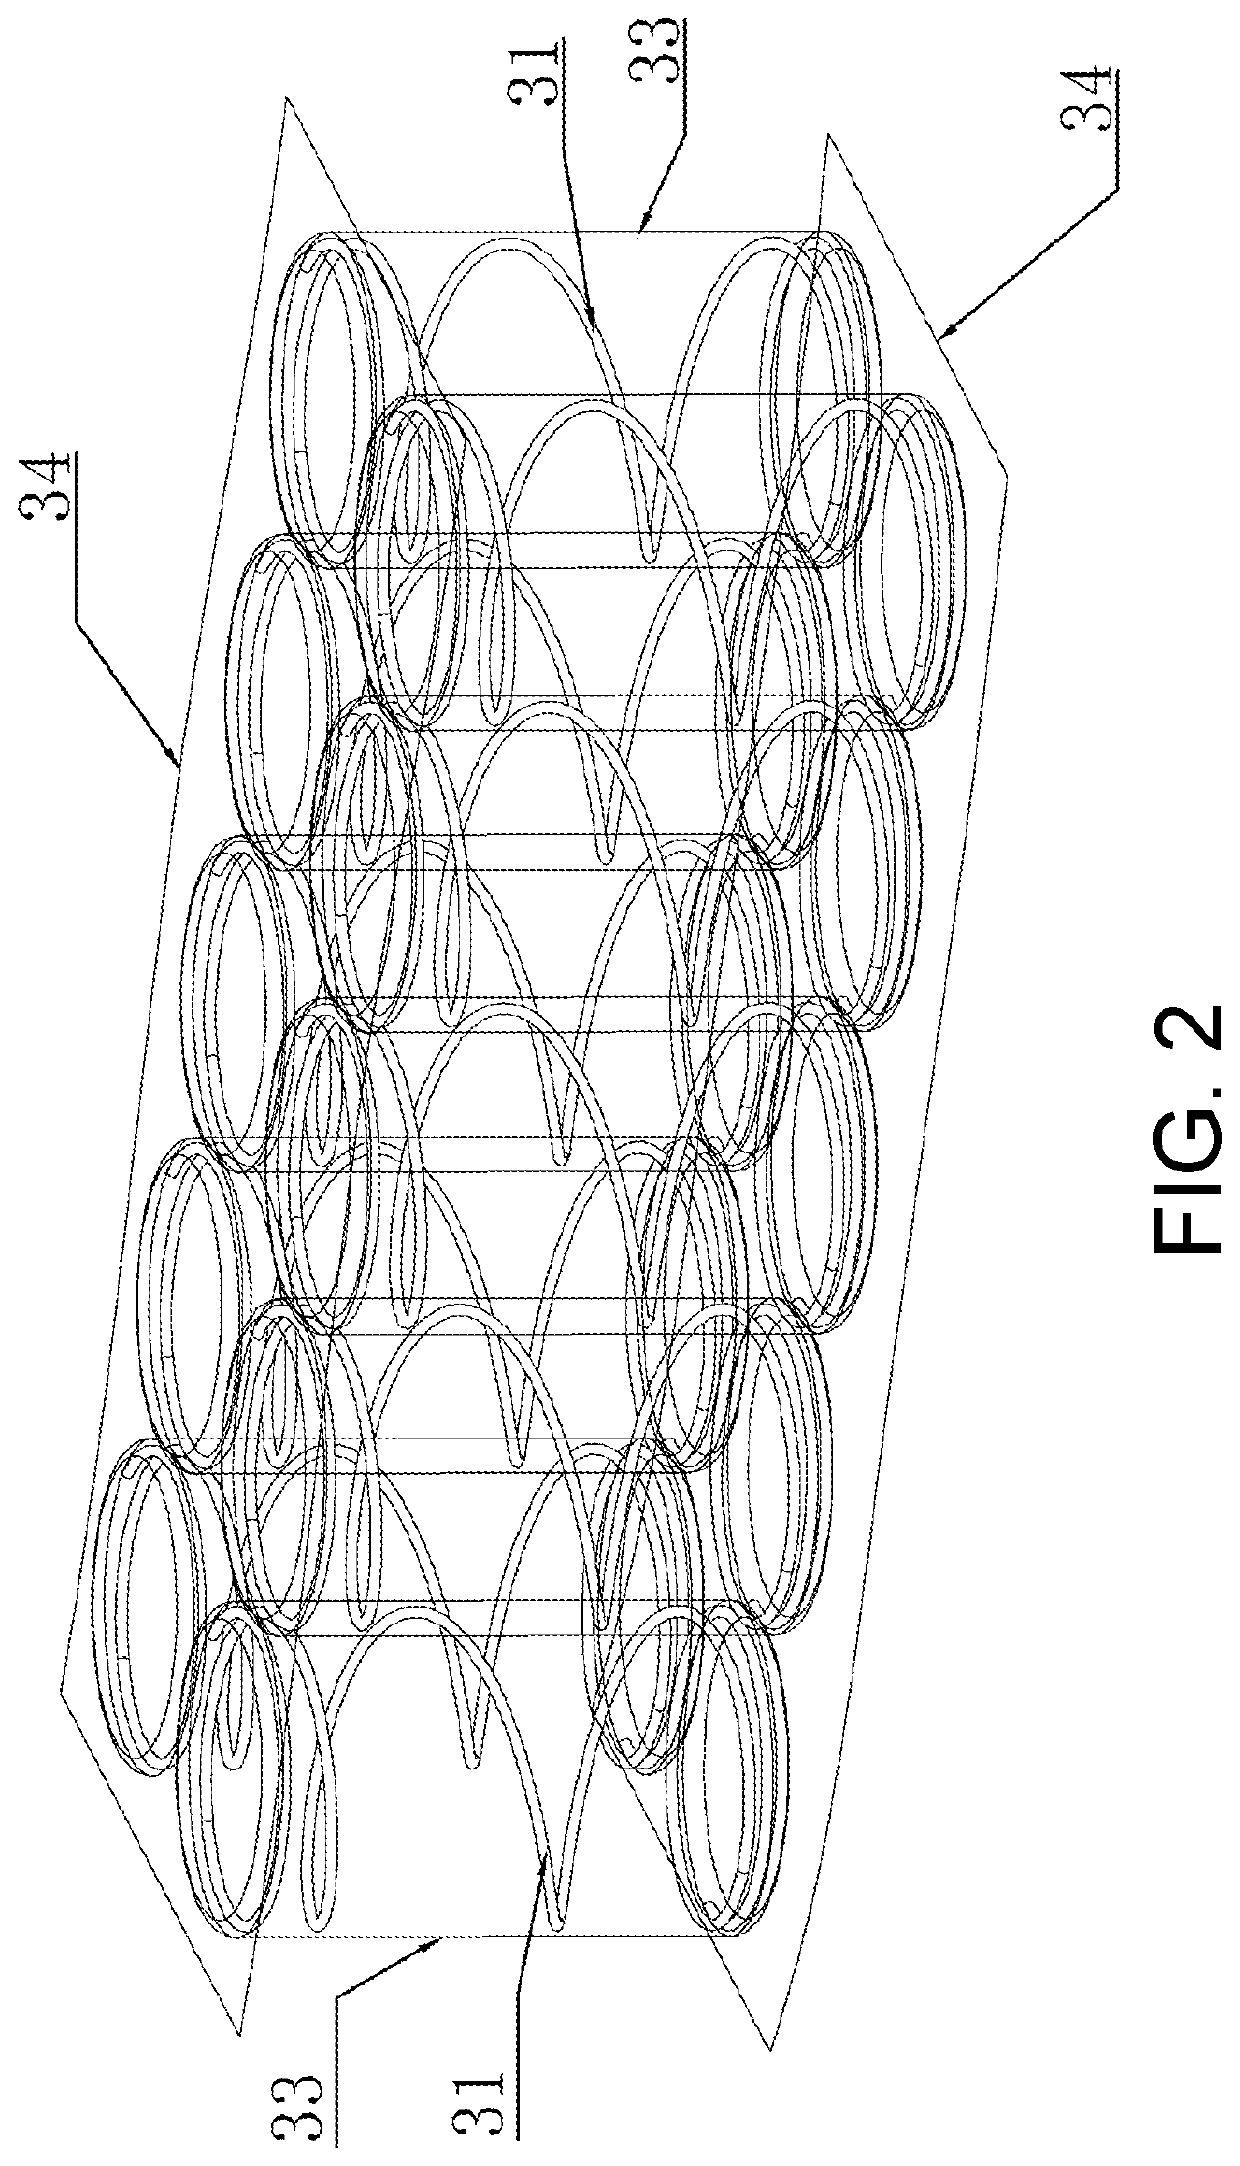 Chair cushion and its supporting structure